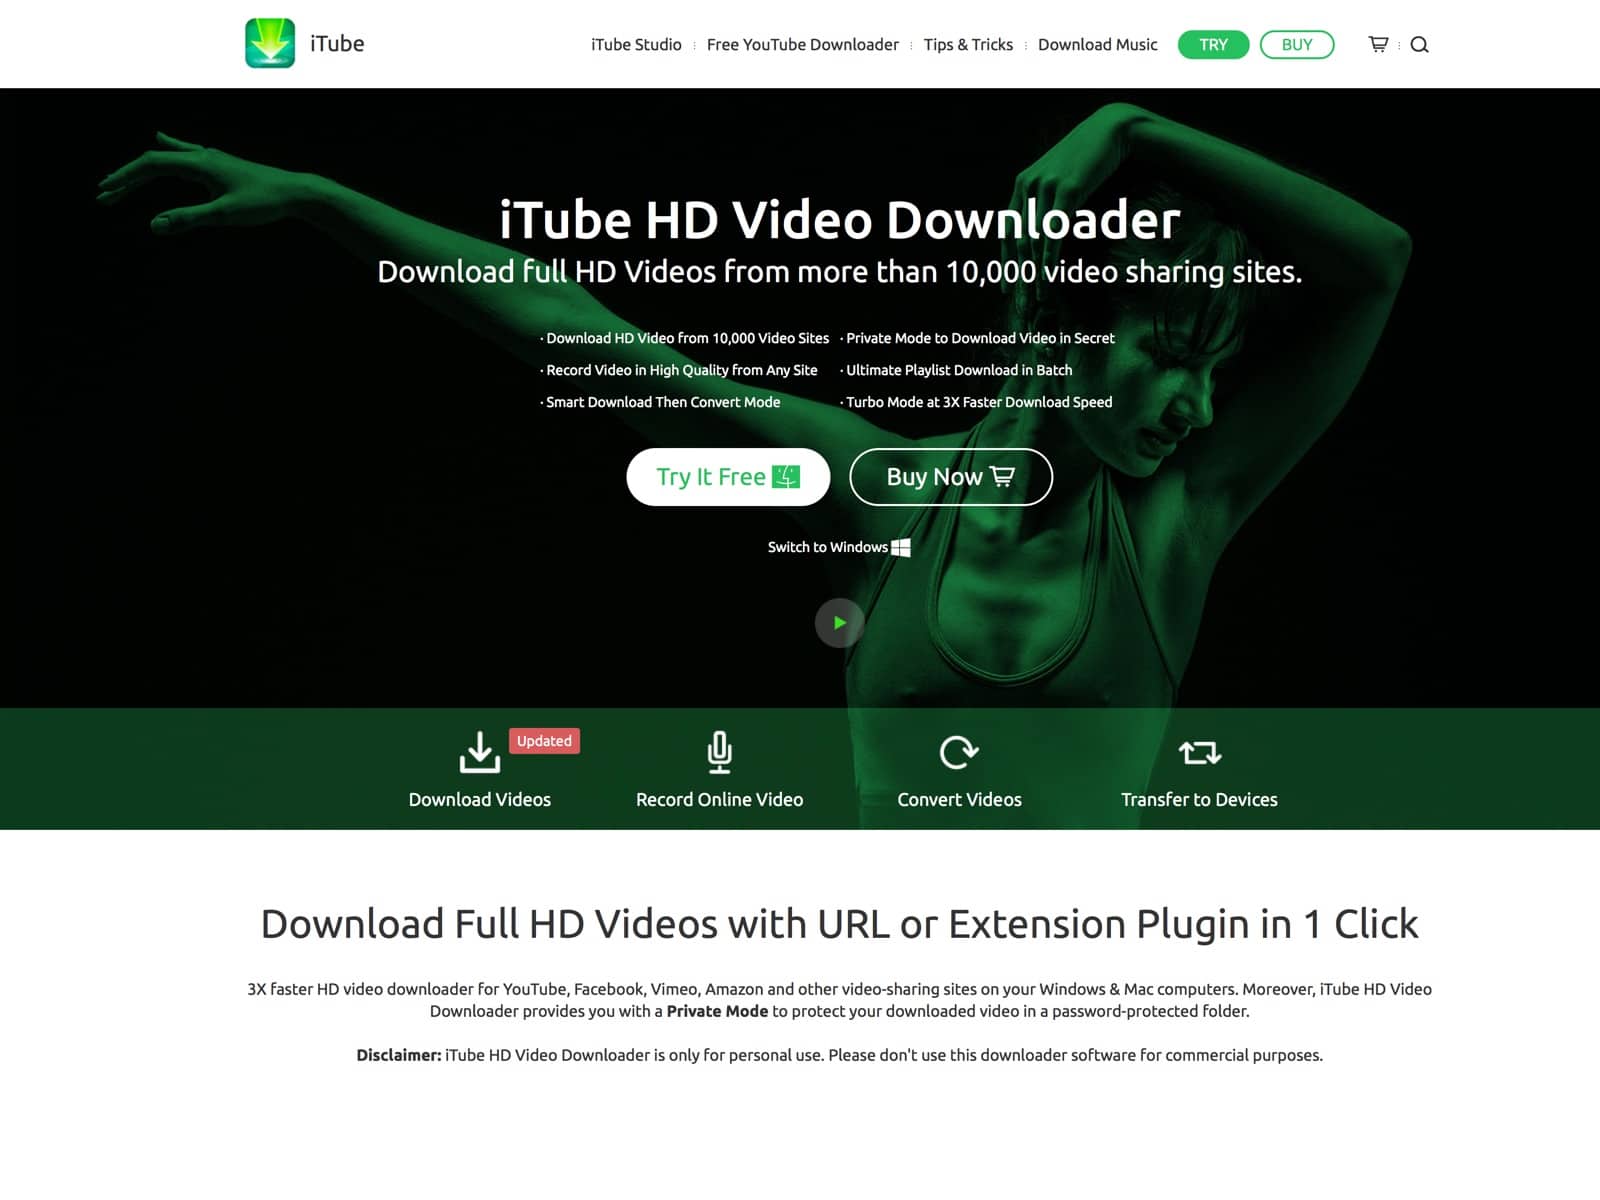 iTube HD Video Downloader can download videos from YouTube and other video-sharing websites and convert videos to any video and audio format in HD 4K, 1440P, 1080P, etc.